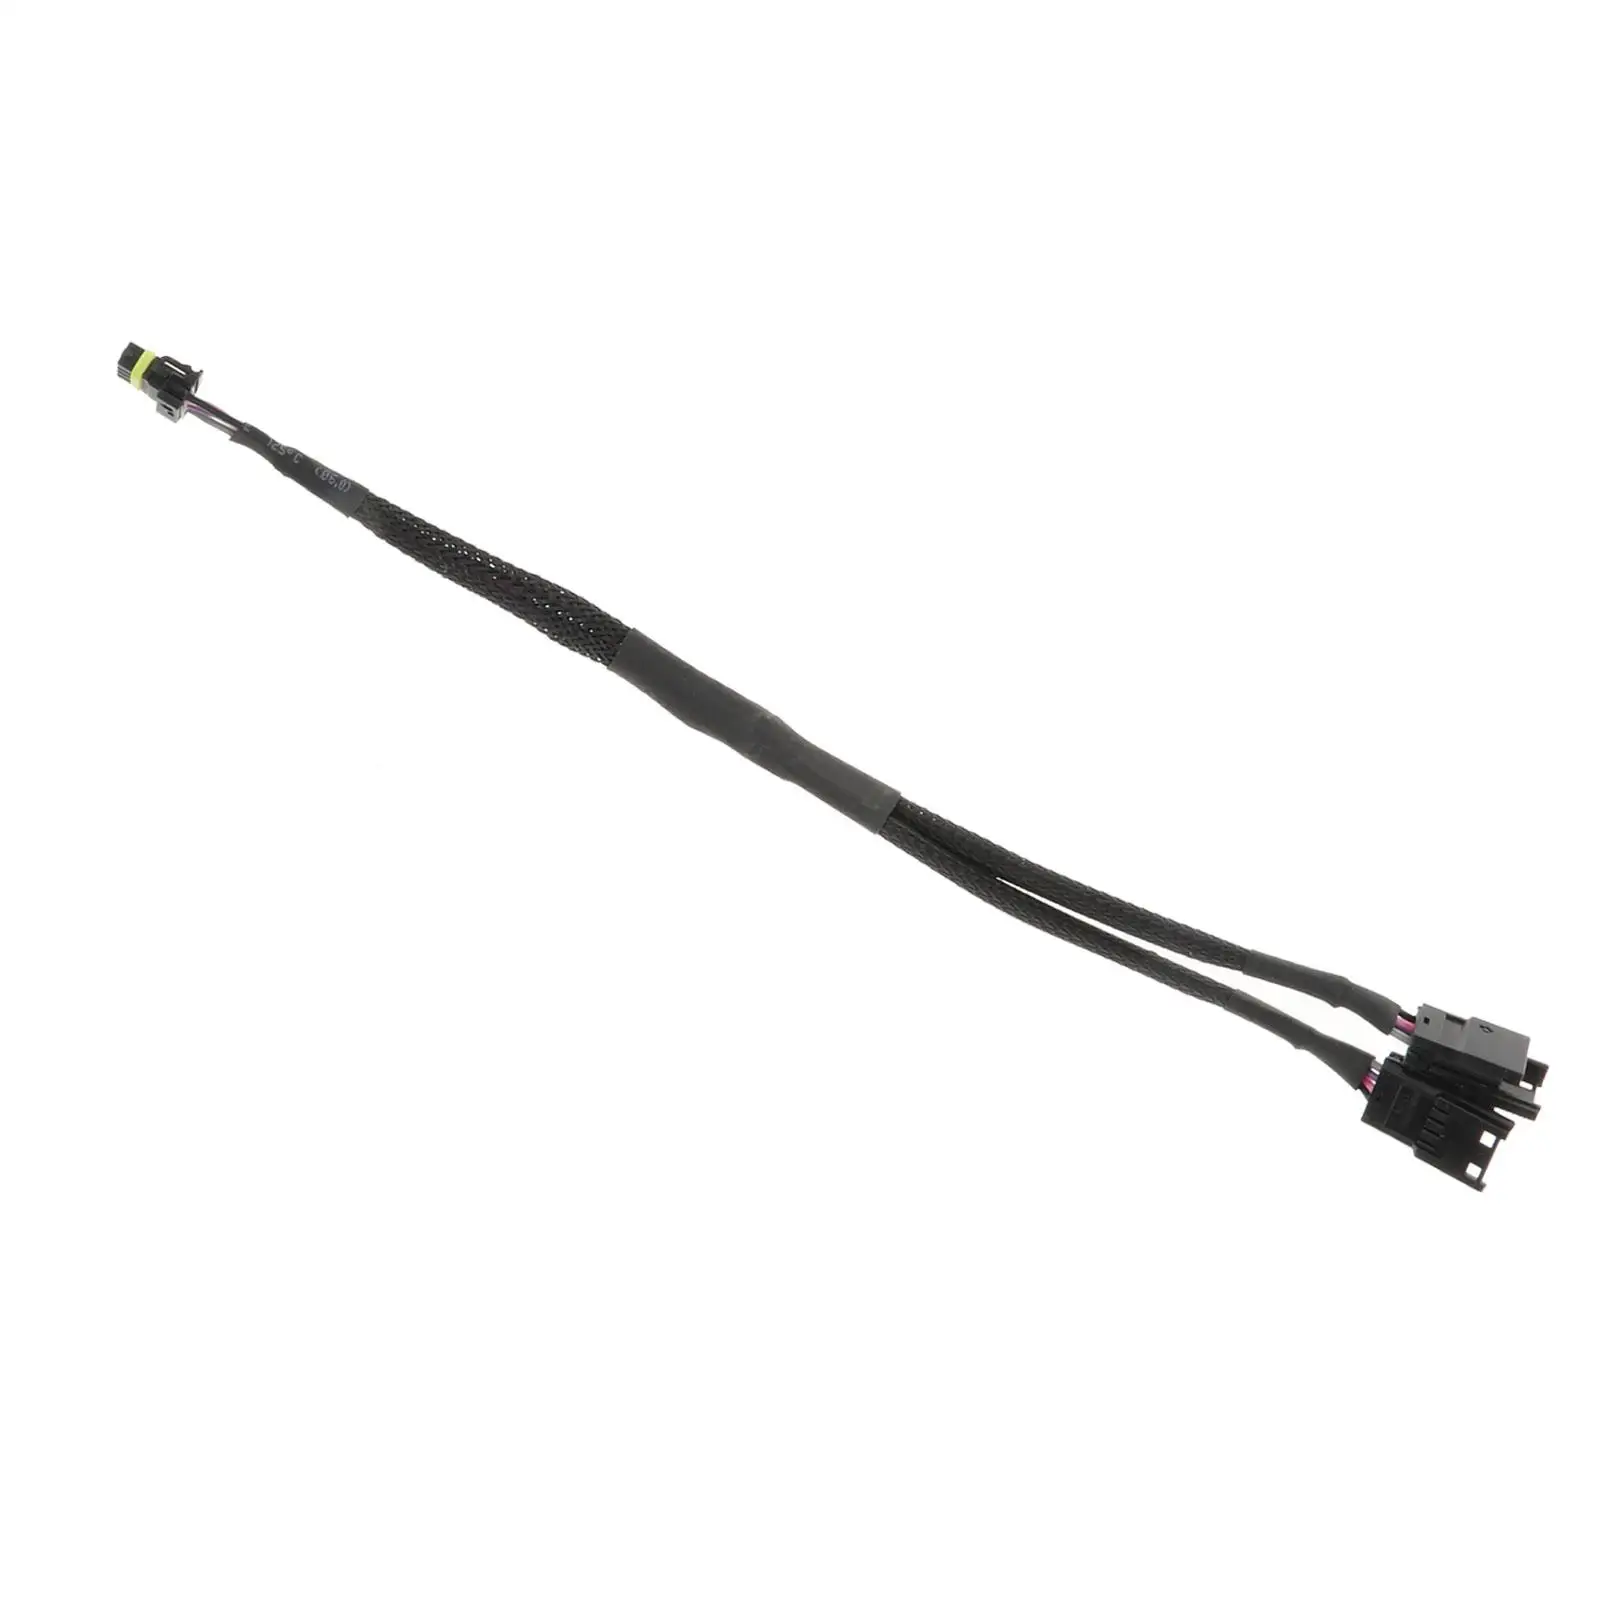 Bus Efi Y Splitter Cable Harness 558-465 Wiring Harness for Efi